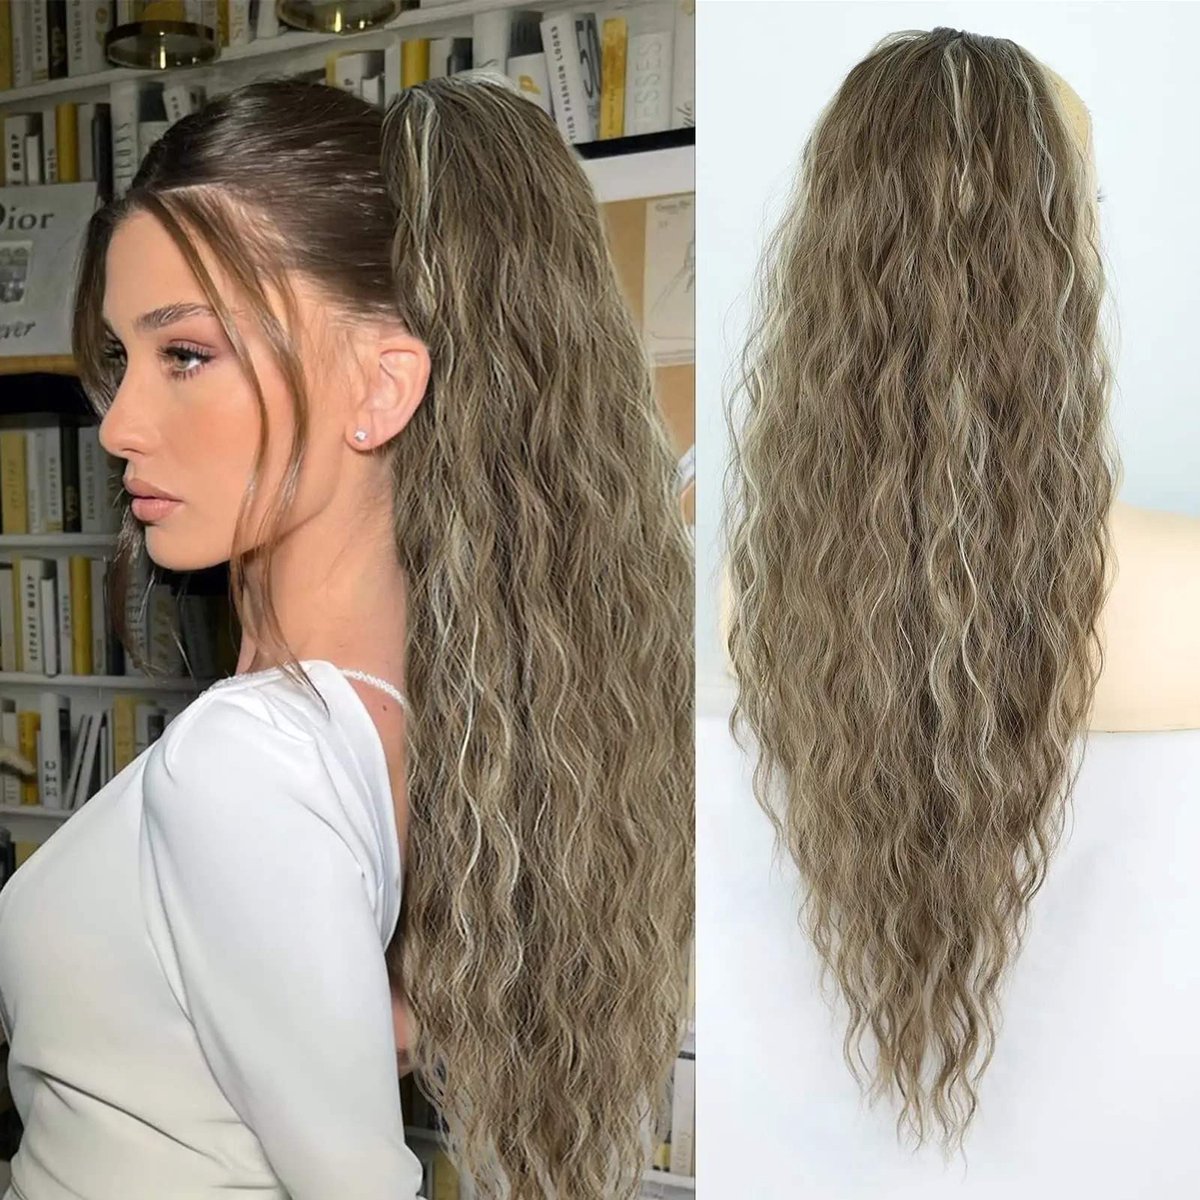 Miss Ponytails - Beachwave ponytail extentions - 26 inch - Bruin/ Blond 18H24 - Hair extentions - Haarverlenging